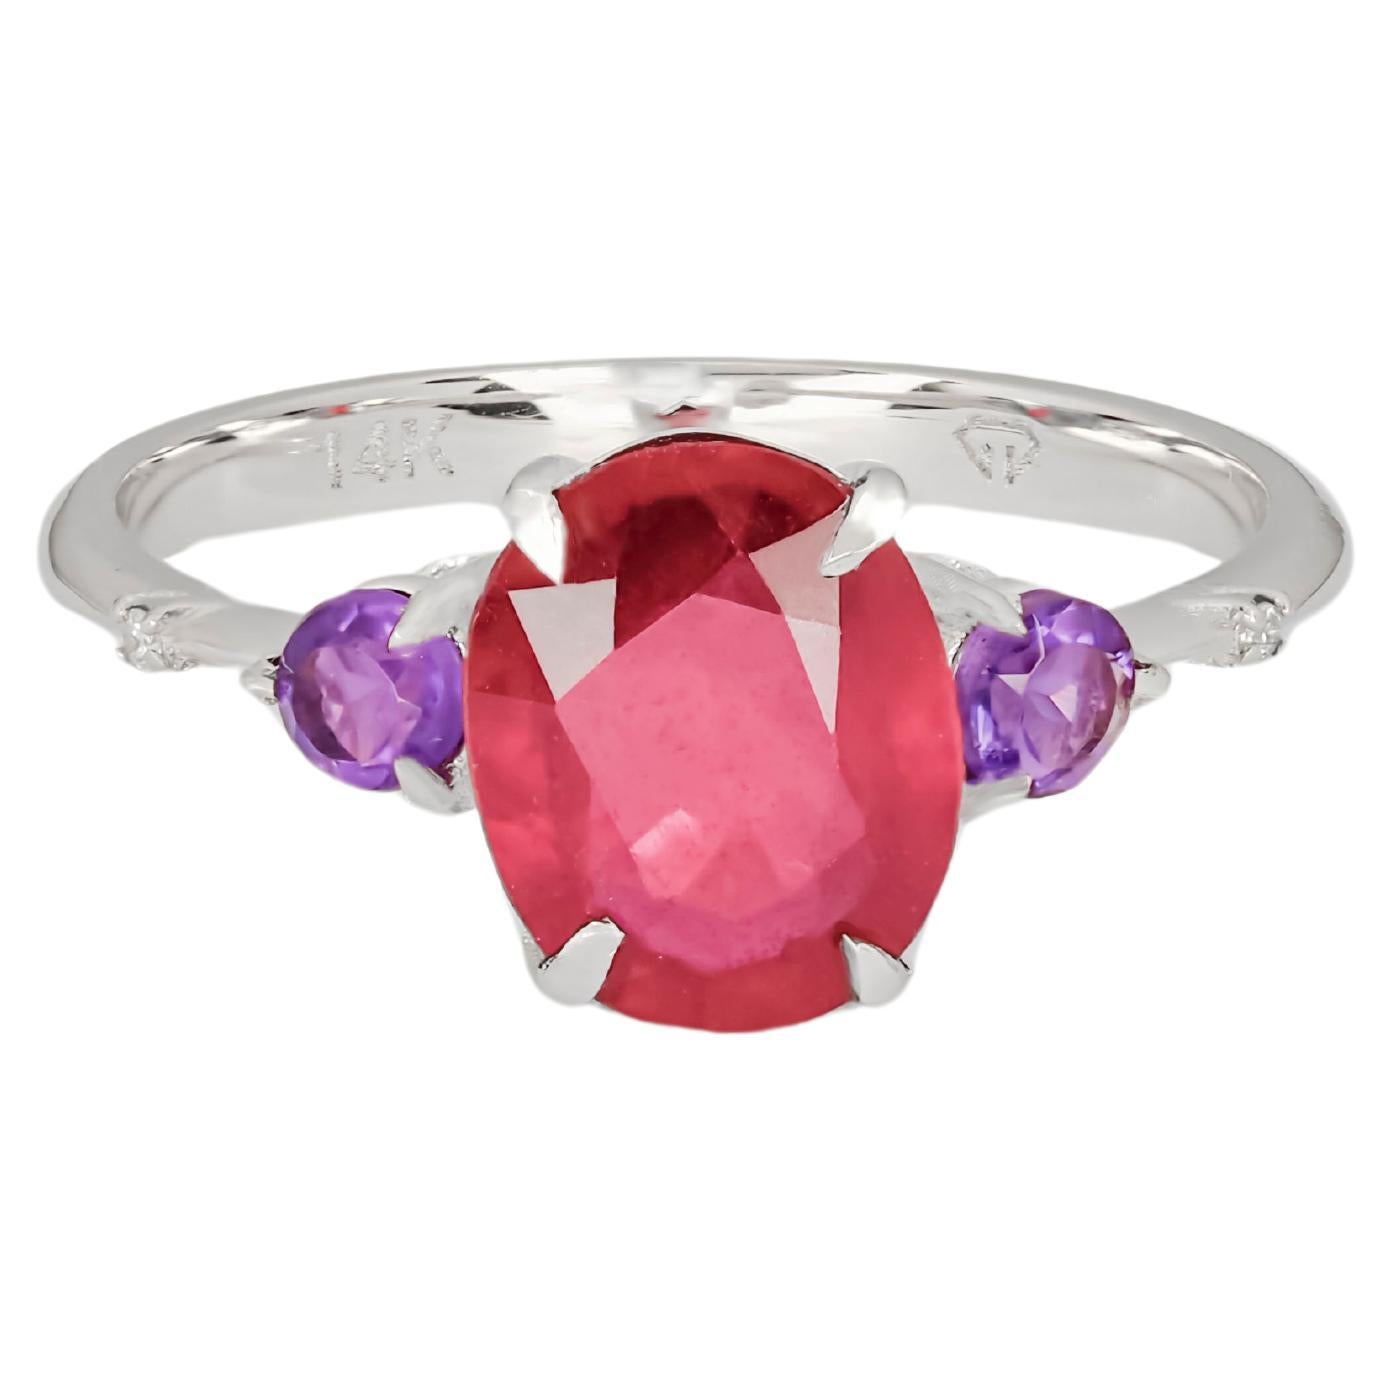 Ruby Ring in 14k Gold, Oval Ruby Ring, Solitaire Ring with Ruby